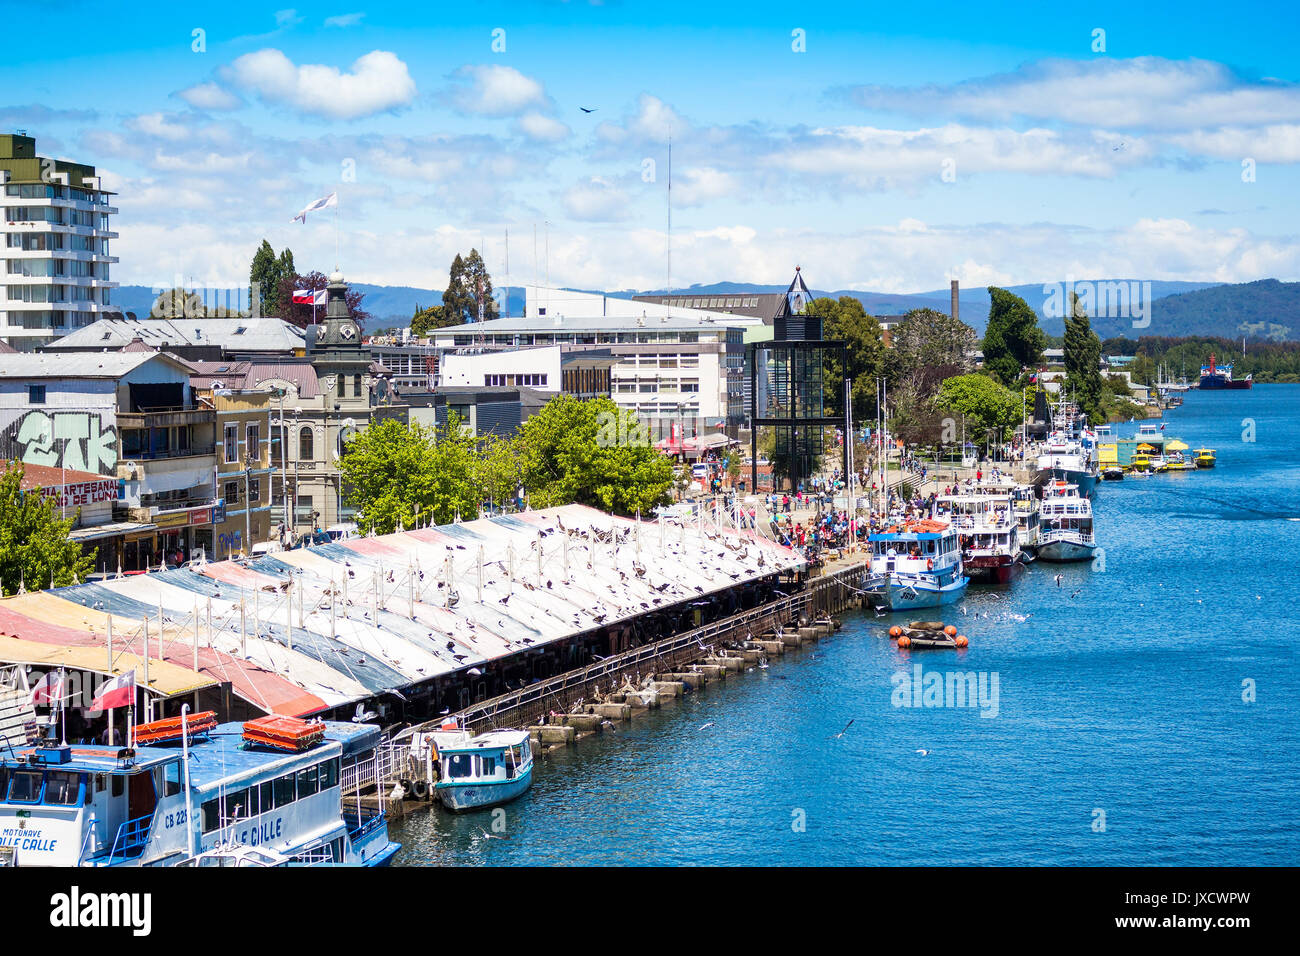 VALDIVIA, CHILE - OCTOBER 30, 2016: Pier and fish market at riverside of Calle-Calle river. This is the main view of Valdivia. Stock Photo